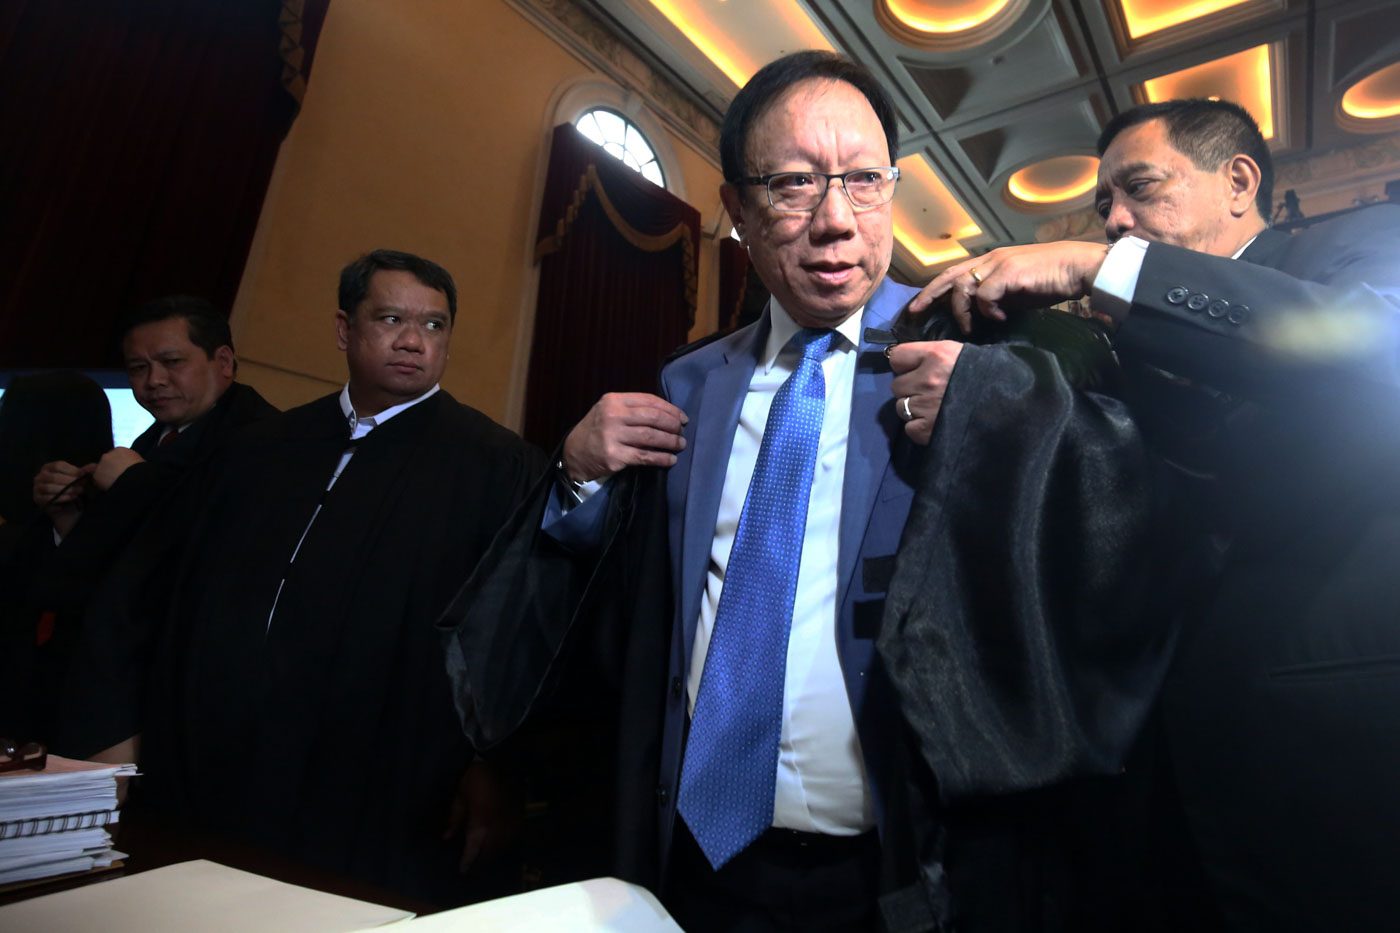 Calida unsure if security firm won as many gov’t contracts before 2016